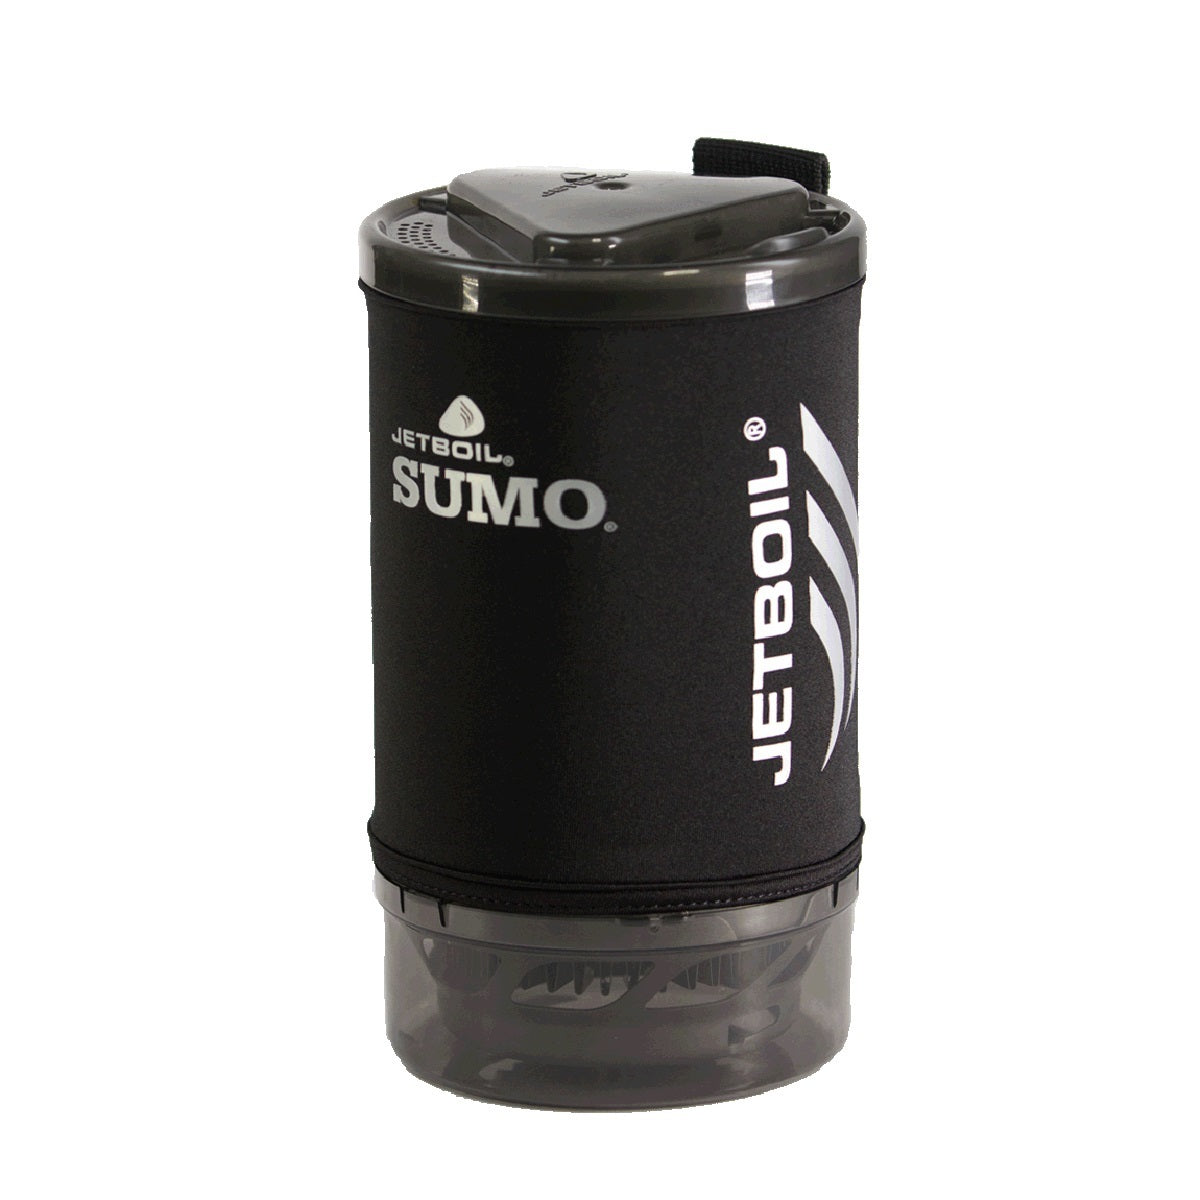 Jetboil Sumo System (47) -  - Mansfield Hunting & Fishing - Products to prepare for Corona Virus